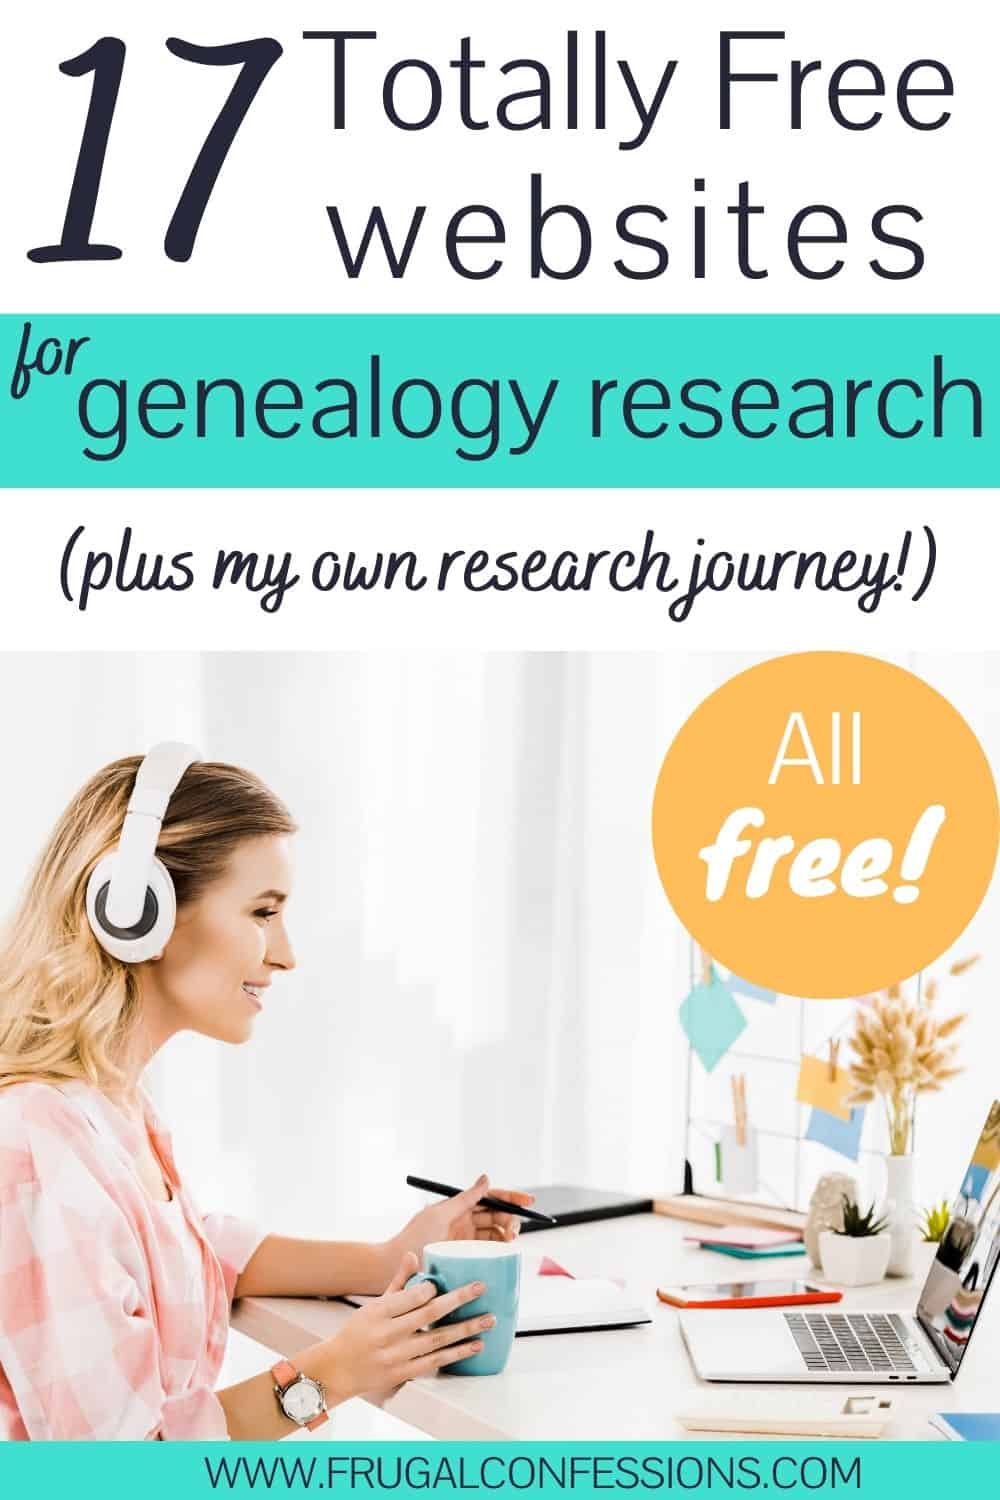 middle aged woman on computer, smiling, text overlay "17 totally free websites for genealogy research"